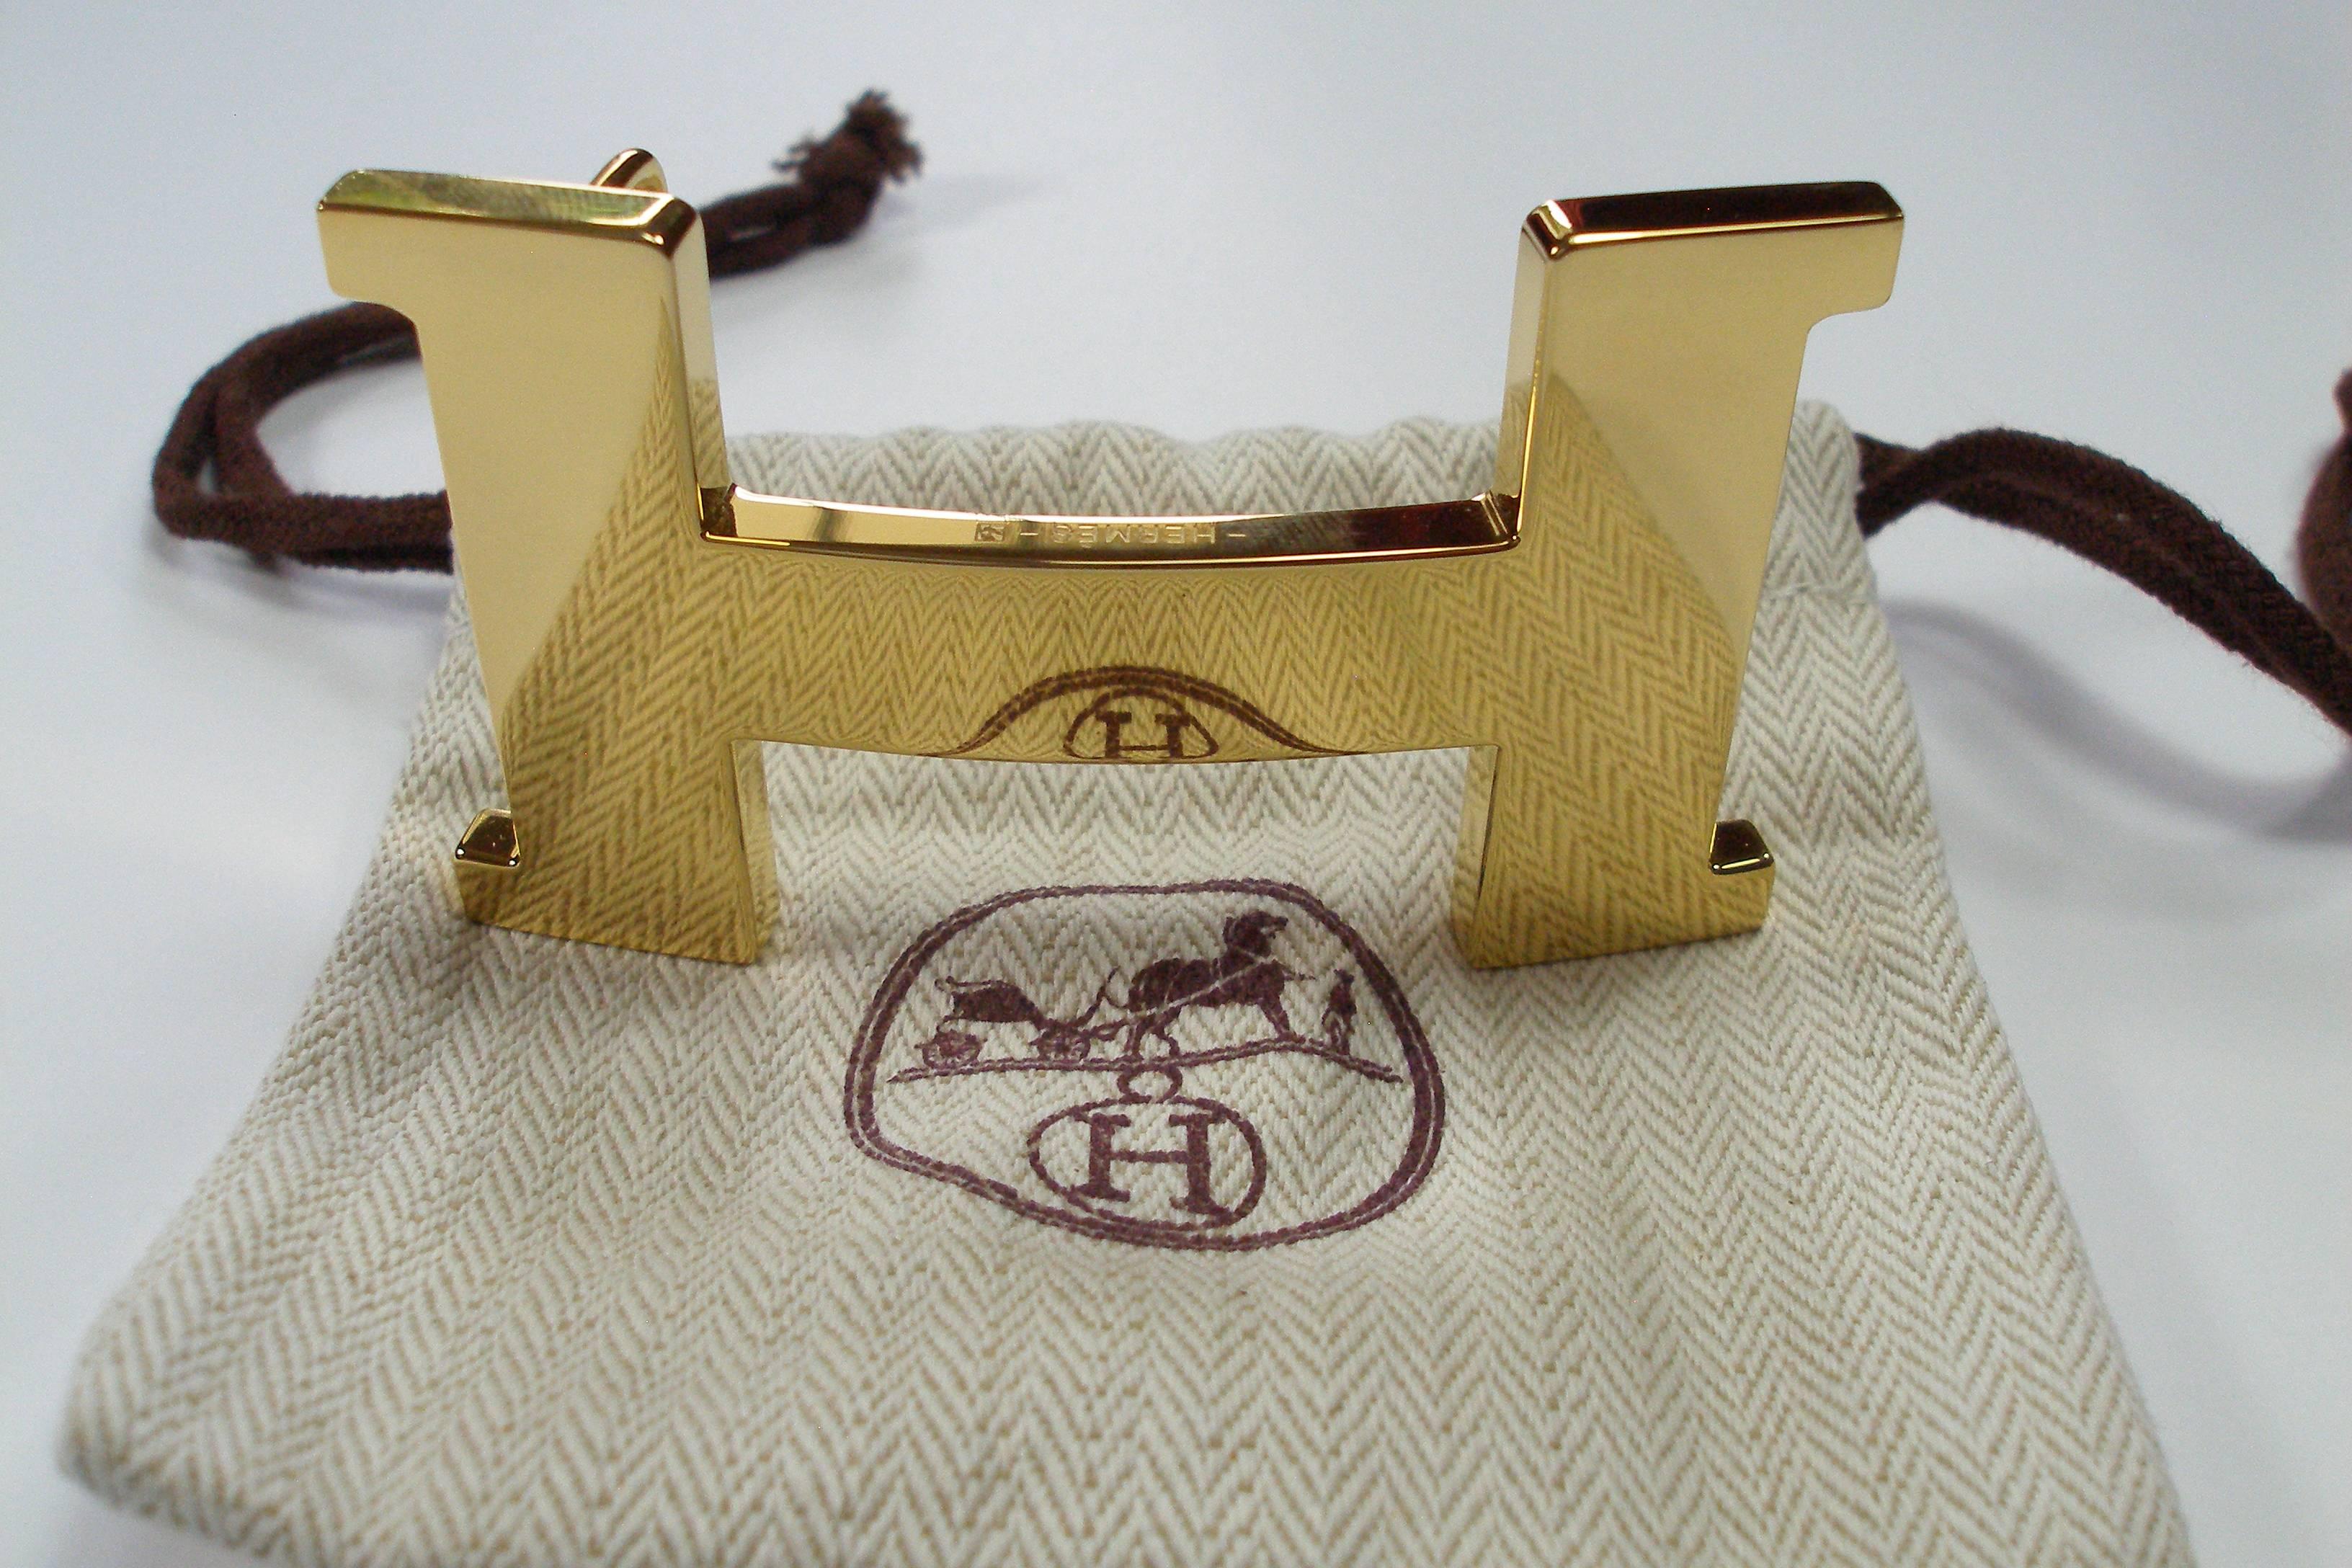 Impossible to buy this H constance buckle at the hermès shop
Wonderfull H Constance 2 
For strap in 42 mm or 4.2 cm 
ONLY BUCKLE 
Gold Plated
Signed Hermès and production number
Its comes with Hermès dustbag
Sorry no Box 
Thank you for visiting my